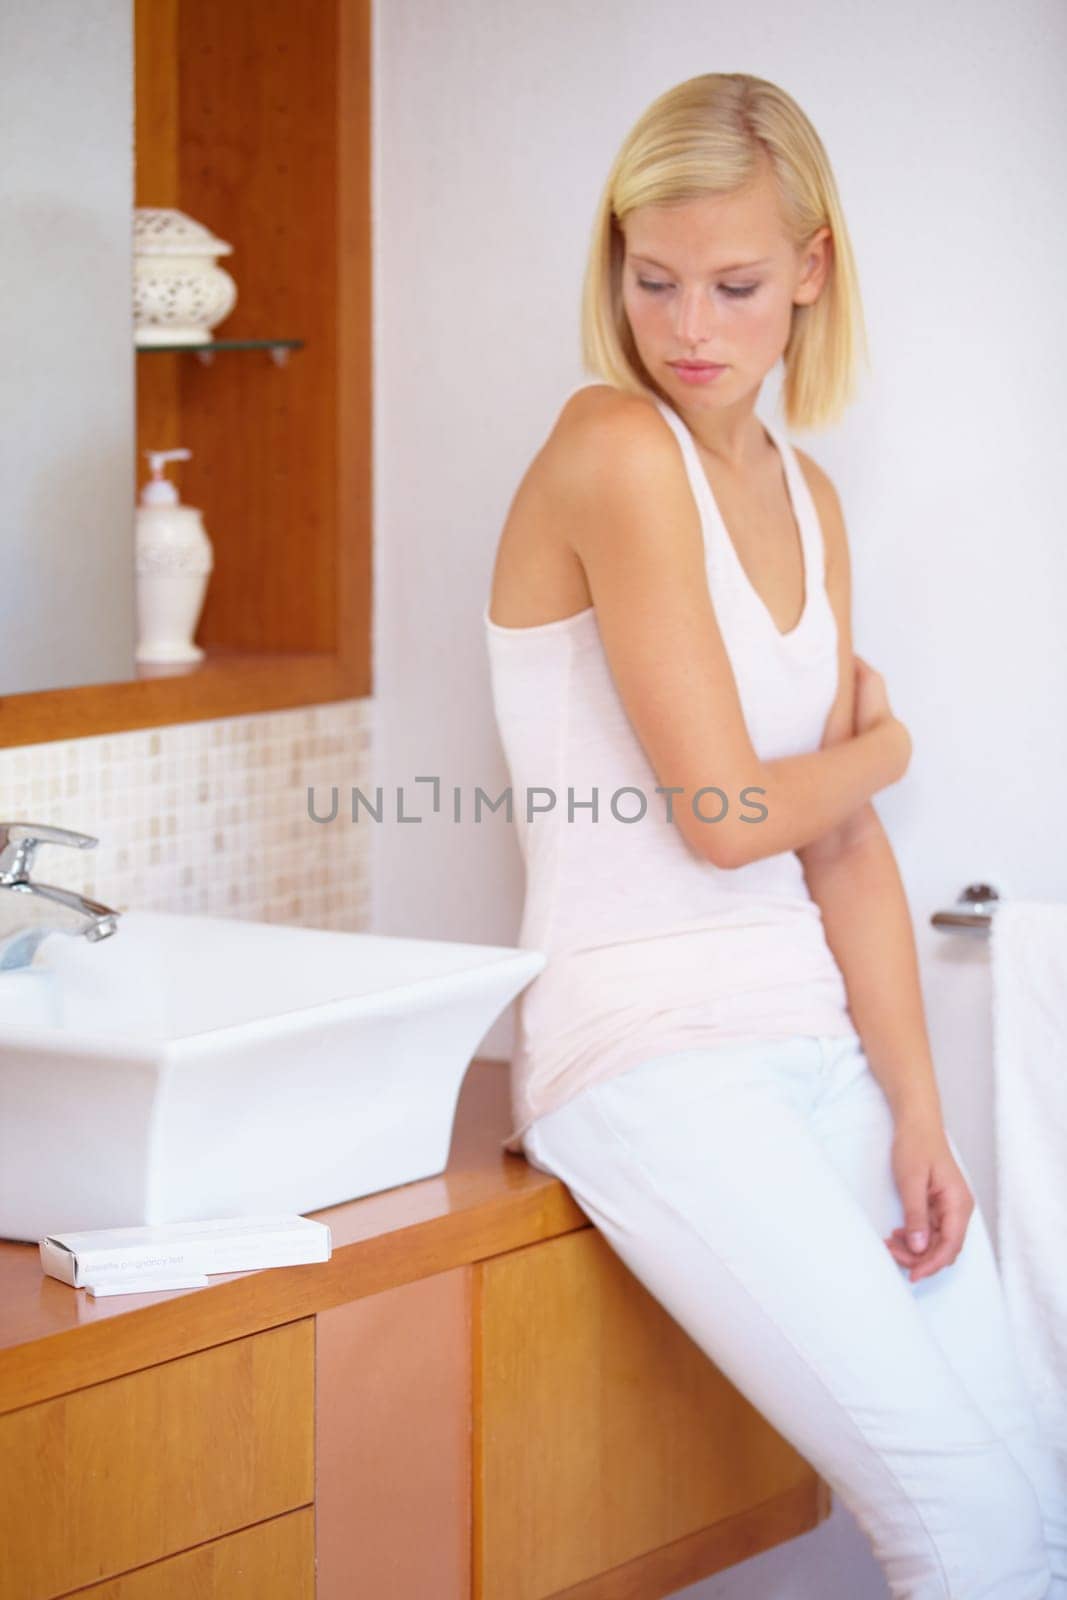 Worry, anxiety and woman with pregnancy test in bathroom waiting for results, news and information. Motherhood, pregnant and sad person with medical testing kit for fertility or ovulation at home.